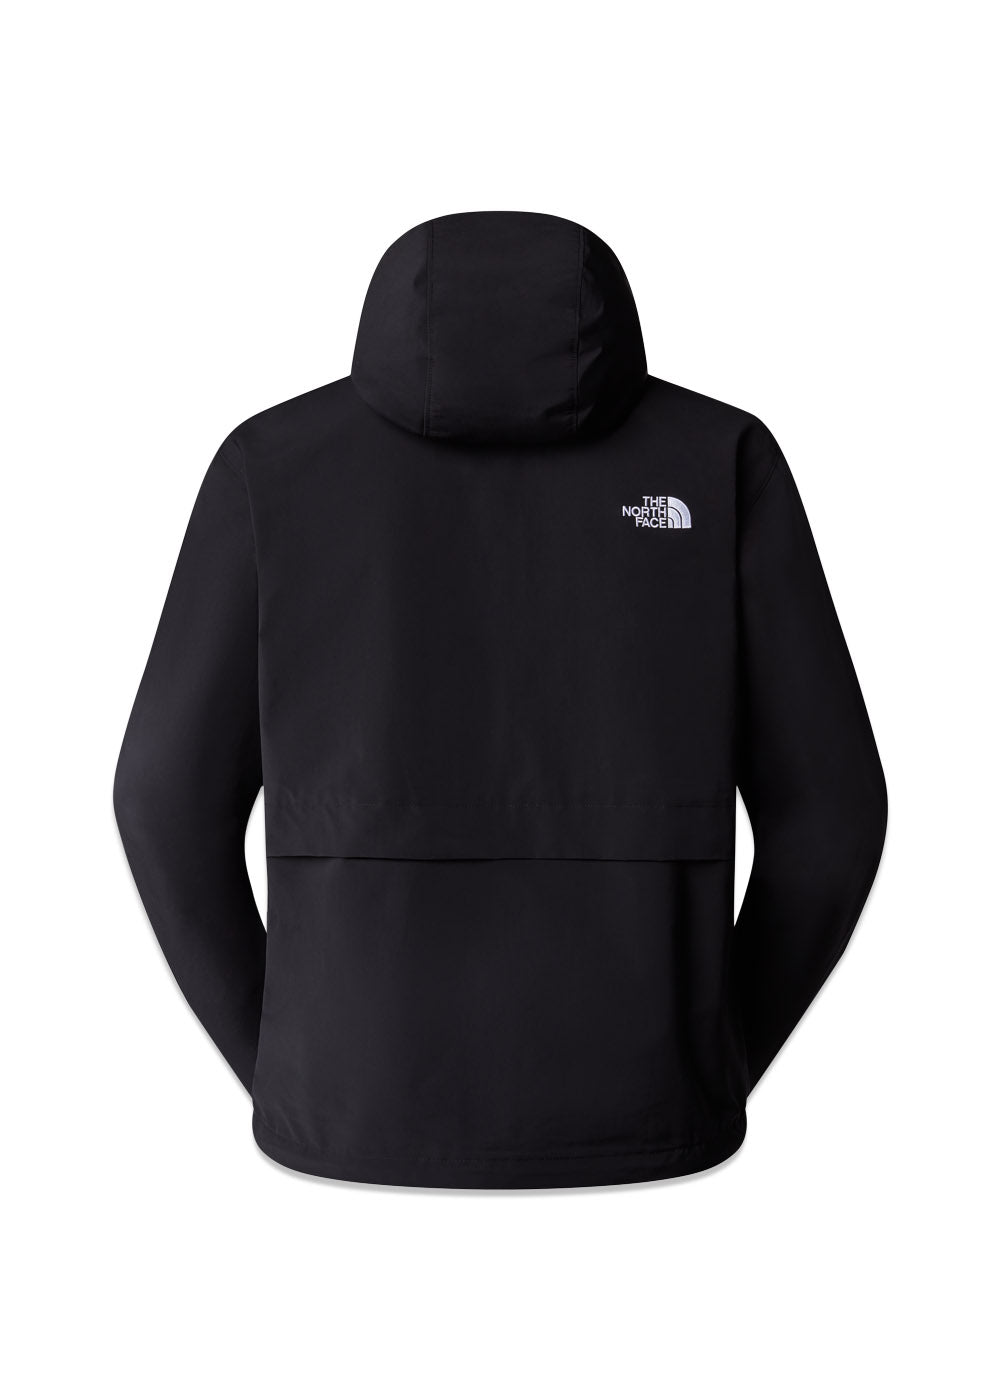 THE NORTH FACE EASY WIND FZ JACKET - Black